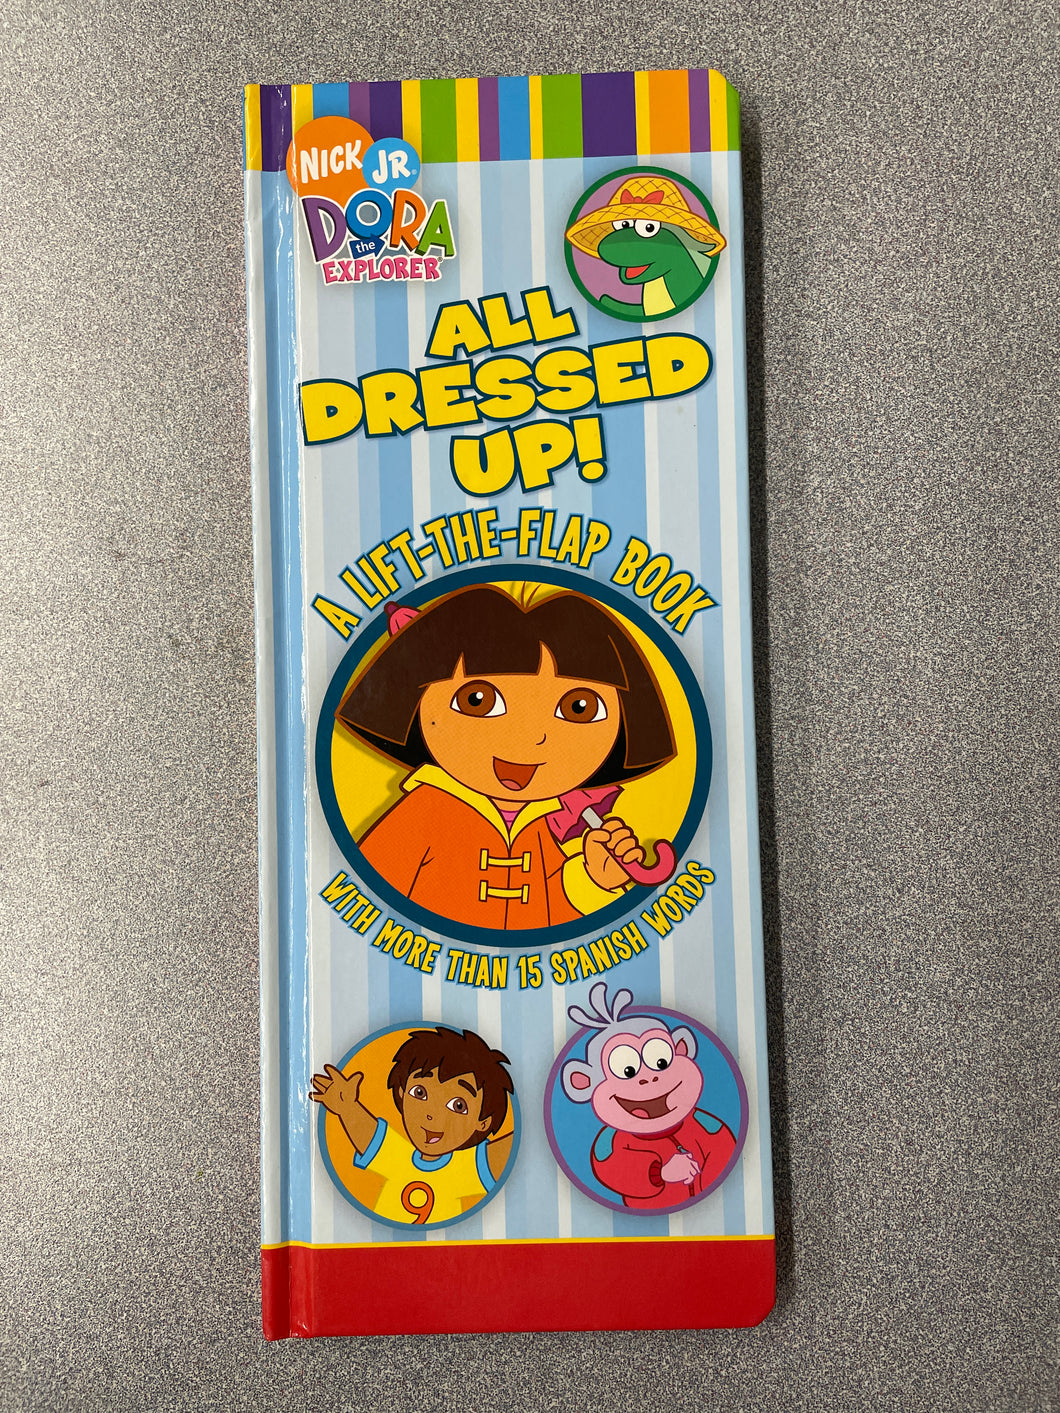 Beinstein, Phoebe and Savitsky, Steven, Illus, All Dressed Up!: A Lift-the-Flap Book (Dora The Explorer) [2005] 4/24